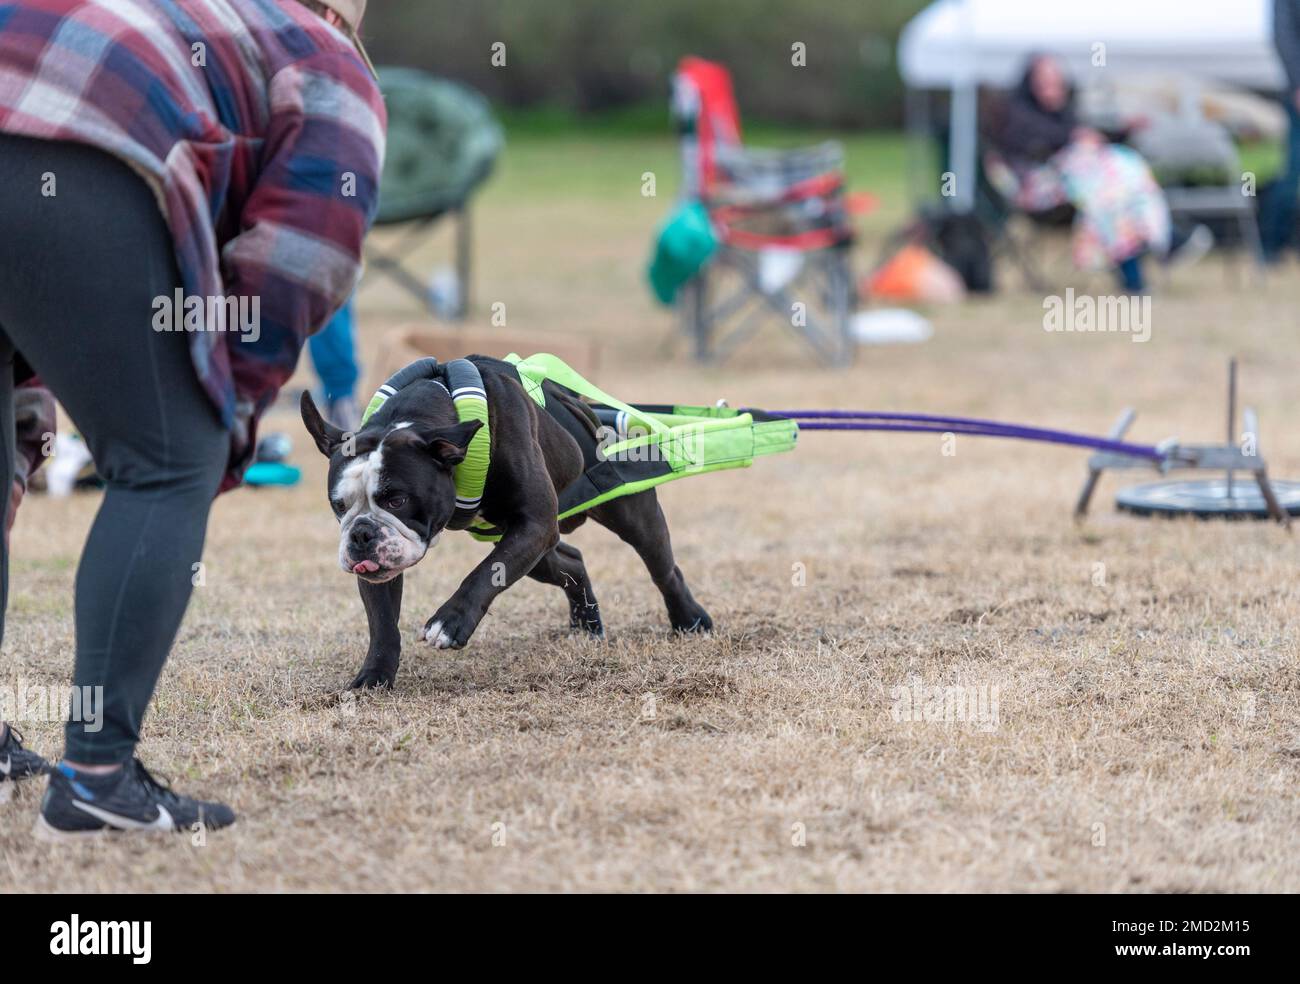 Olde English bulldog dragging a weight sled at an event Stock Photo